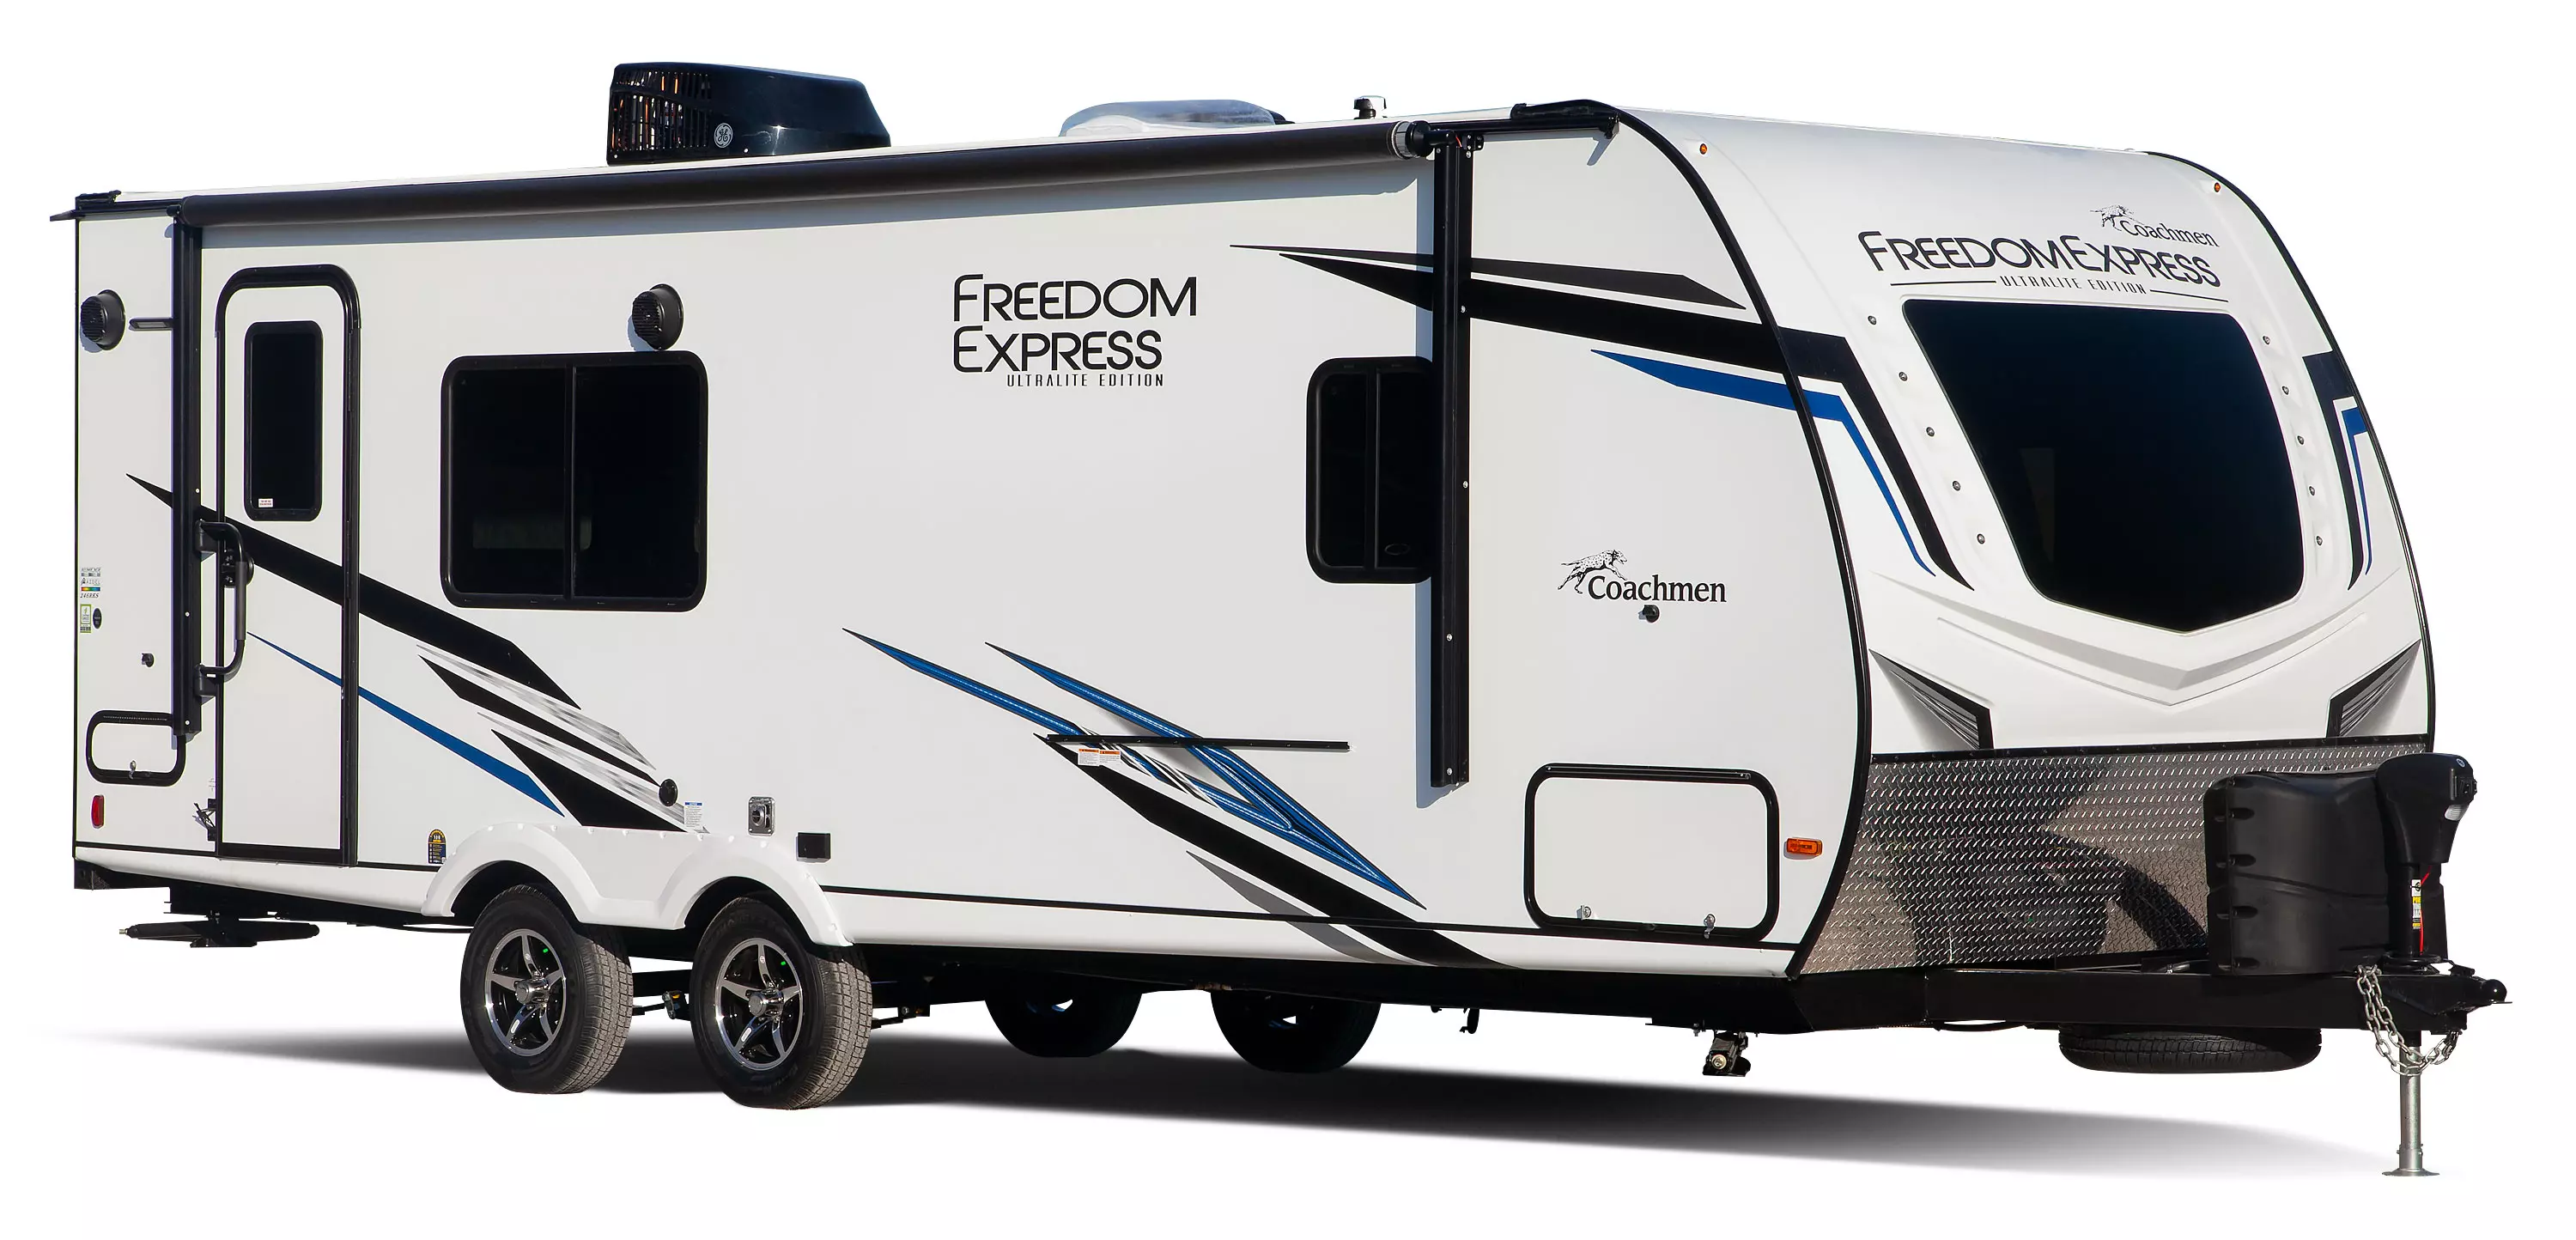 Freedom Express Ultra Lite Gallery Image